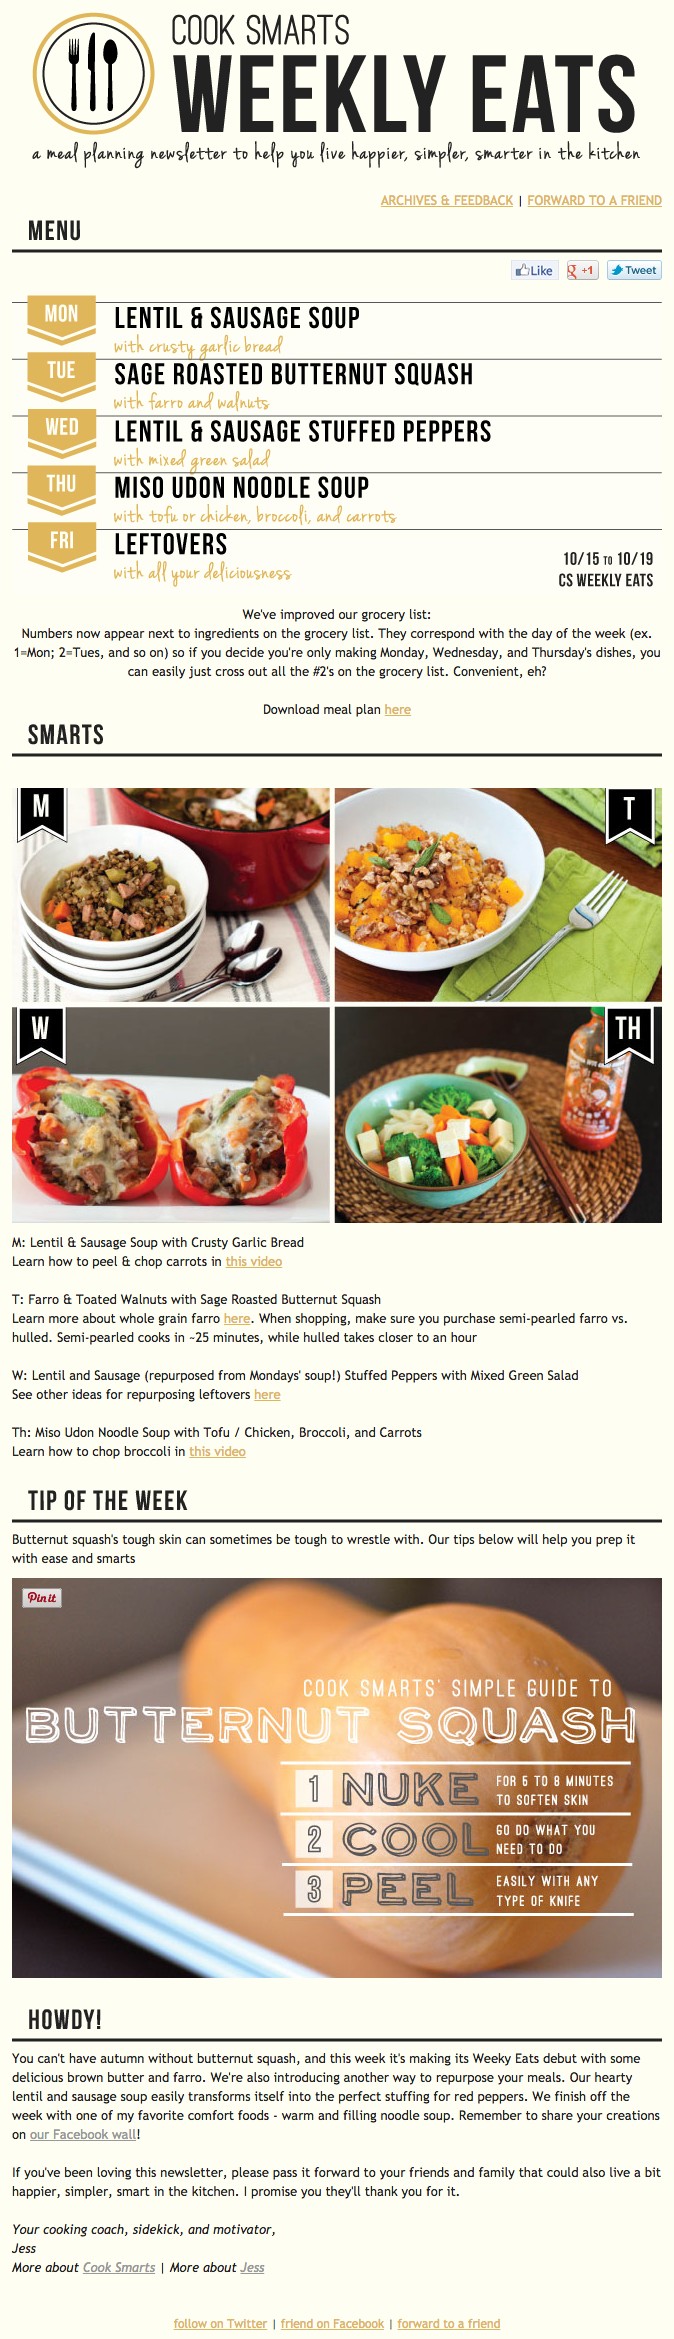 Email marketing campaign example by Cook Smarts on Weekly Eats